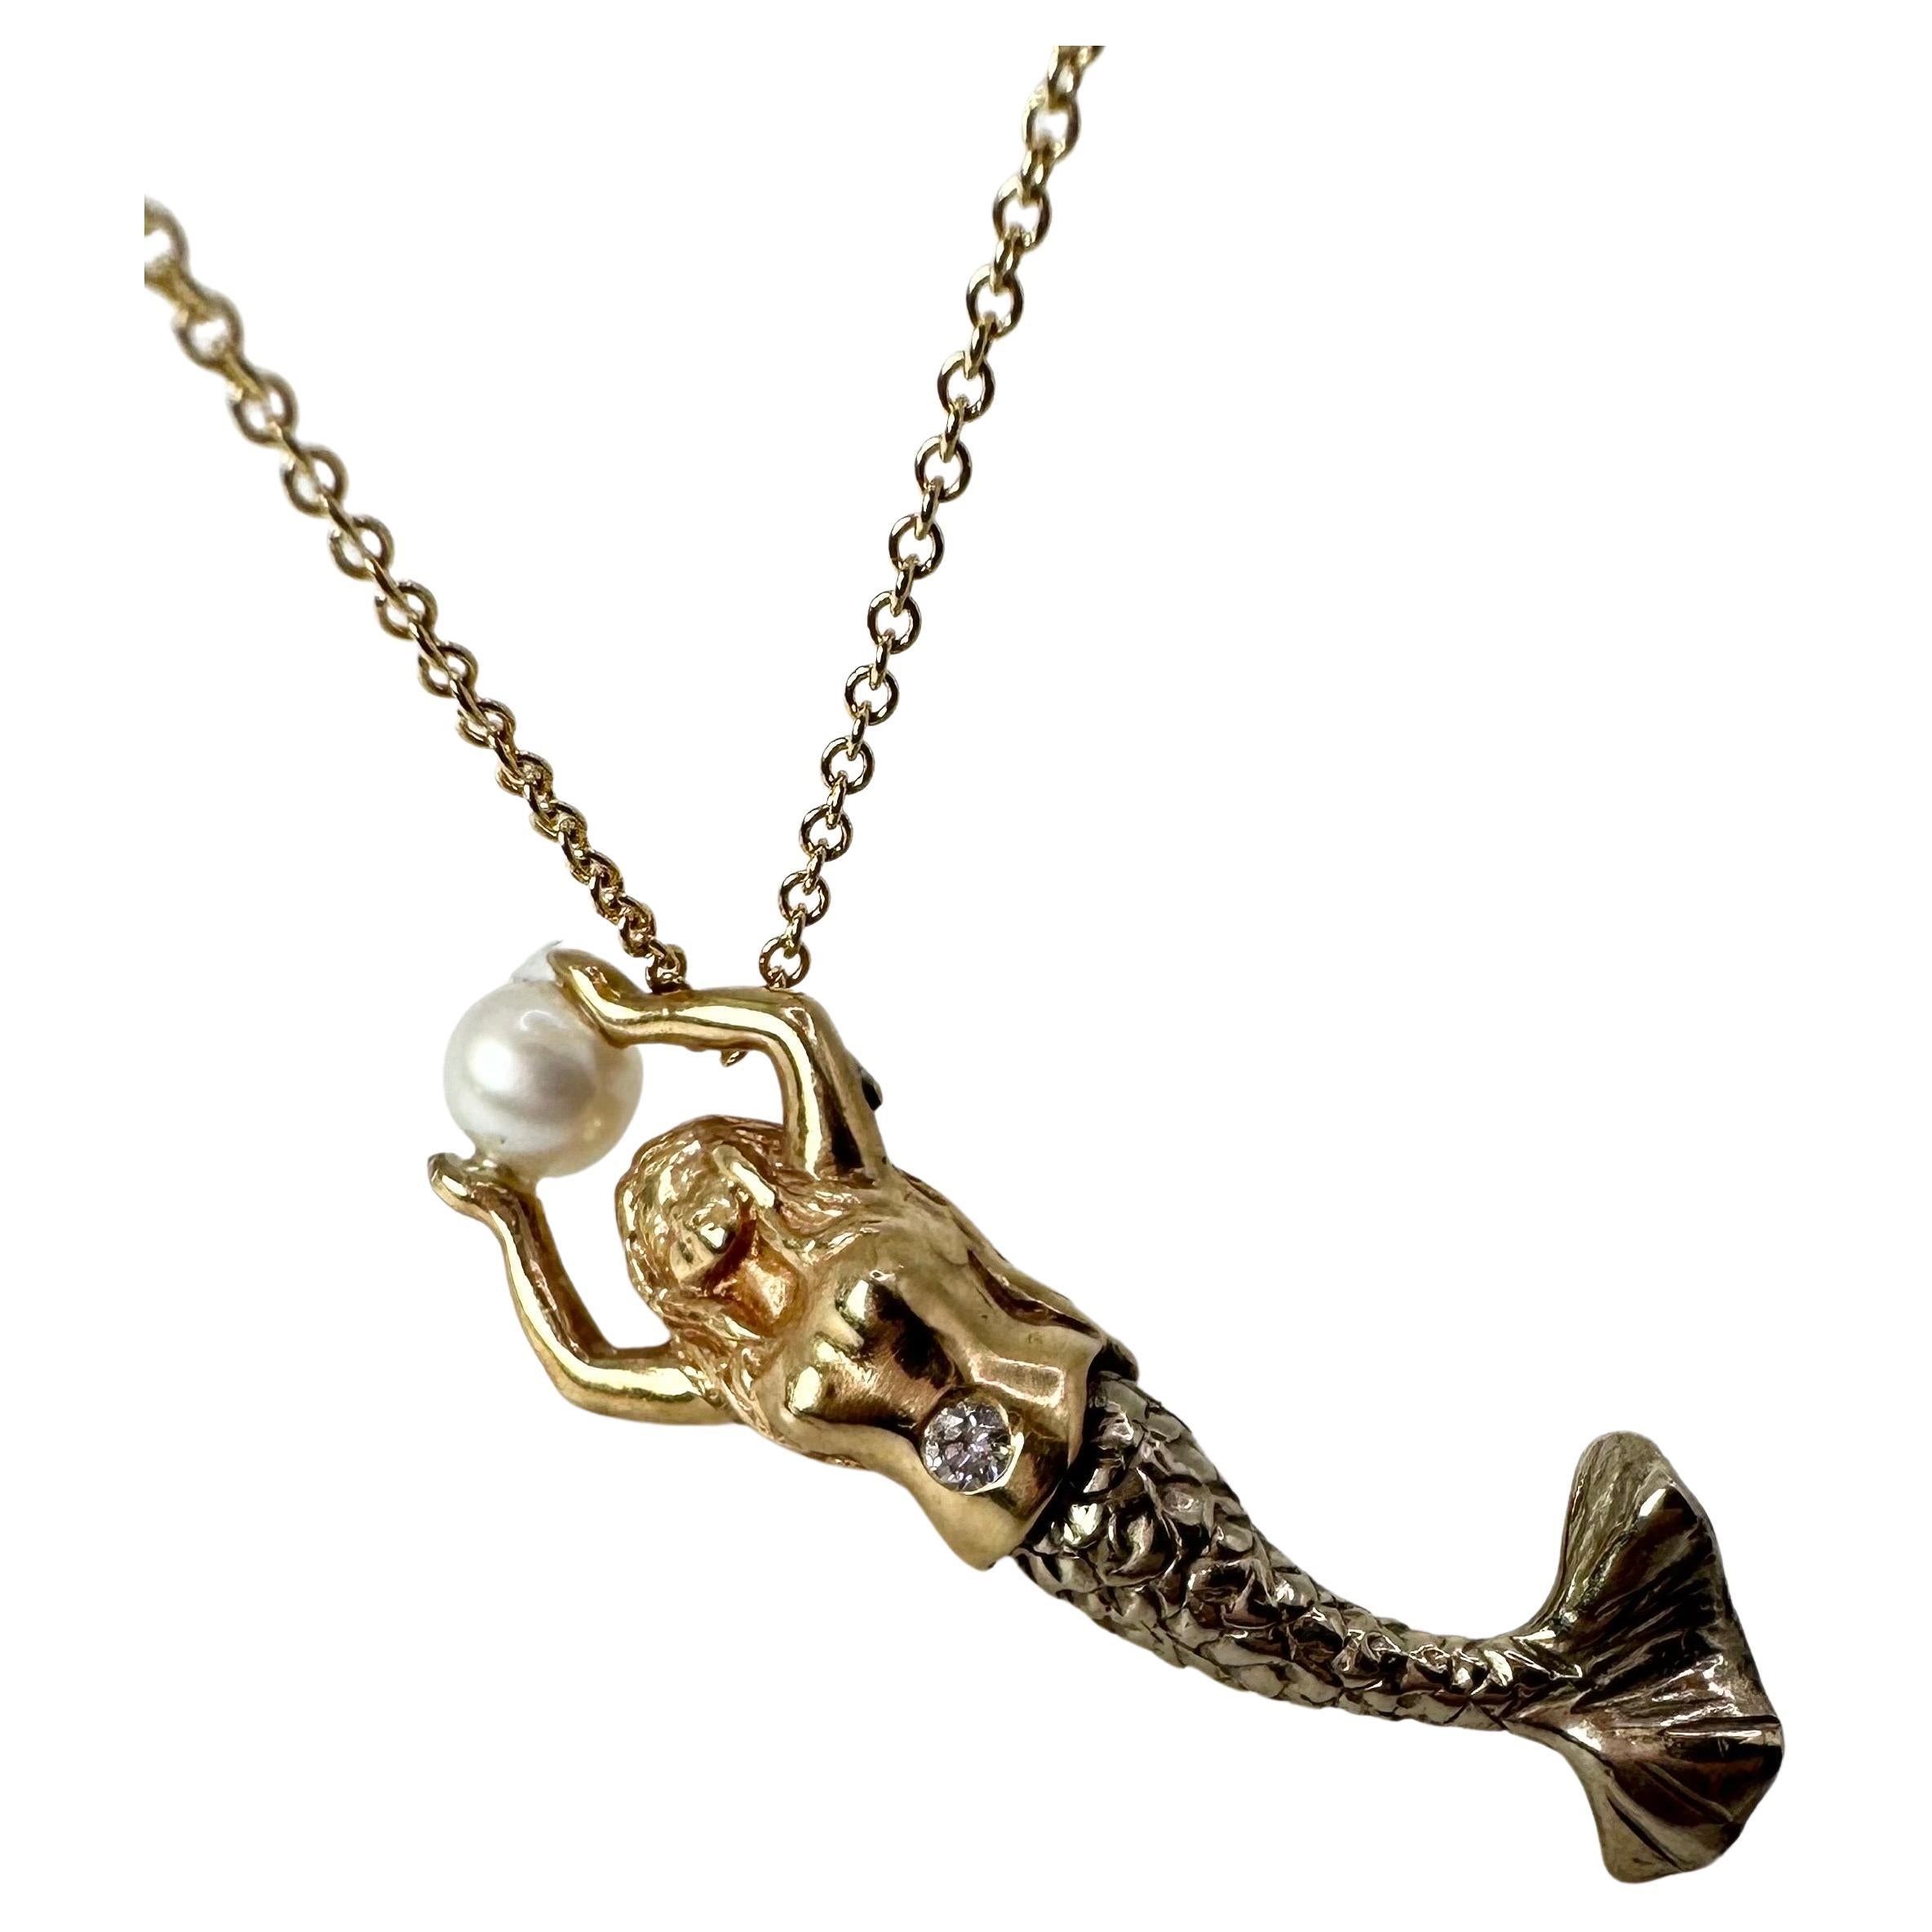 Mermaid Pearl Pendant Necklace Unique Hand Engraved Pendant 14kt Yellow Gold